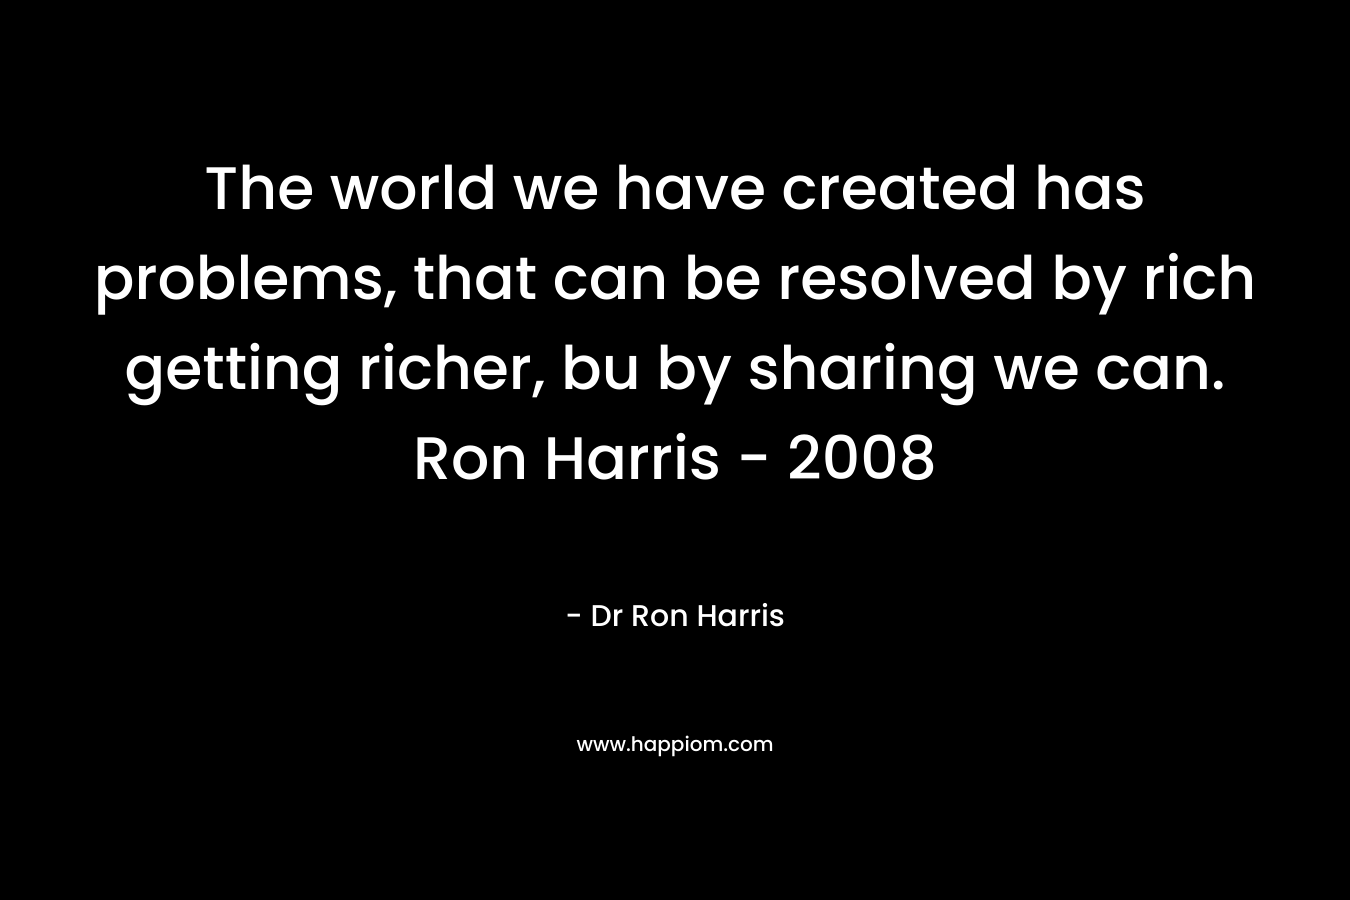 The world we have created has problems, that can be resolved by rich getting richer, bu by sharing we can. Ron Harris - 2008